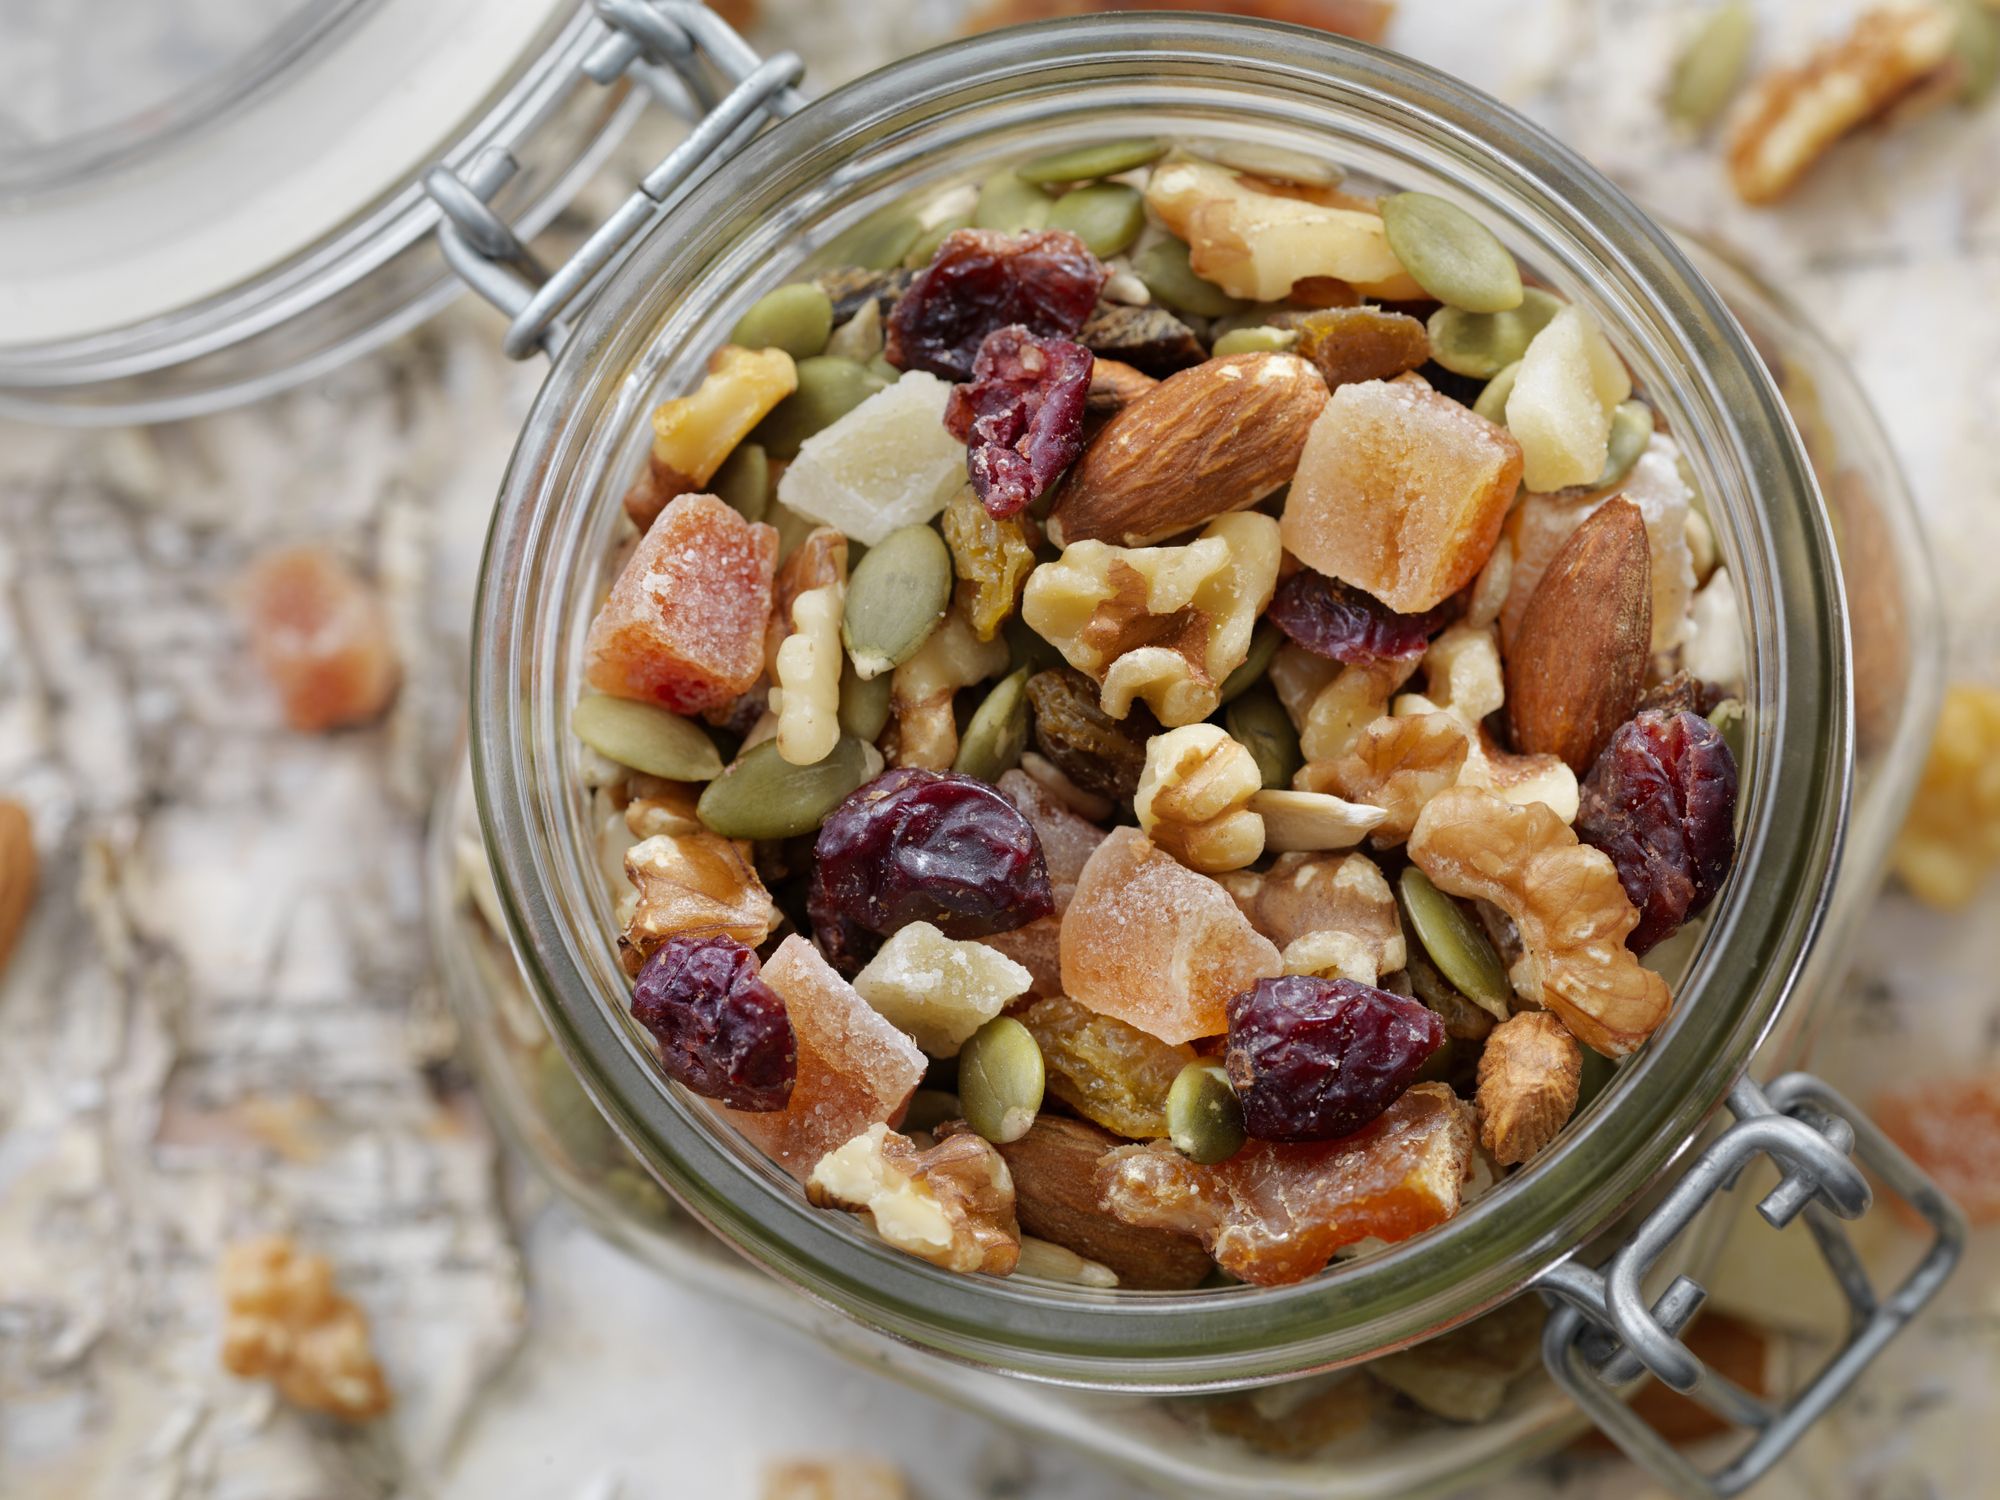 Simple Lunchbox Ideas - With Easy Trail Mix Recipe